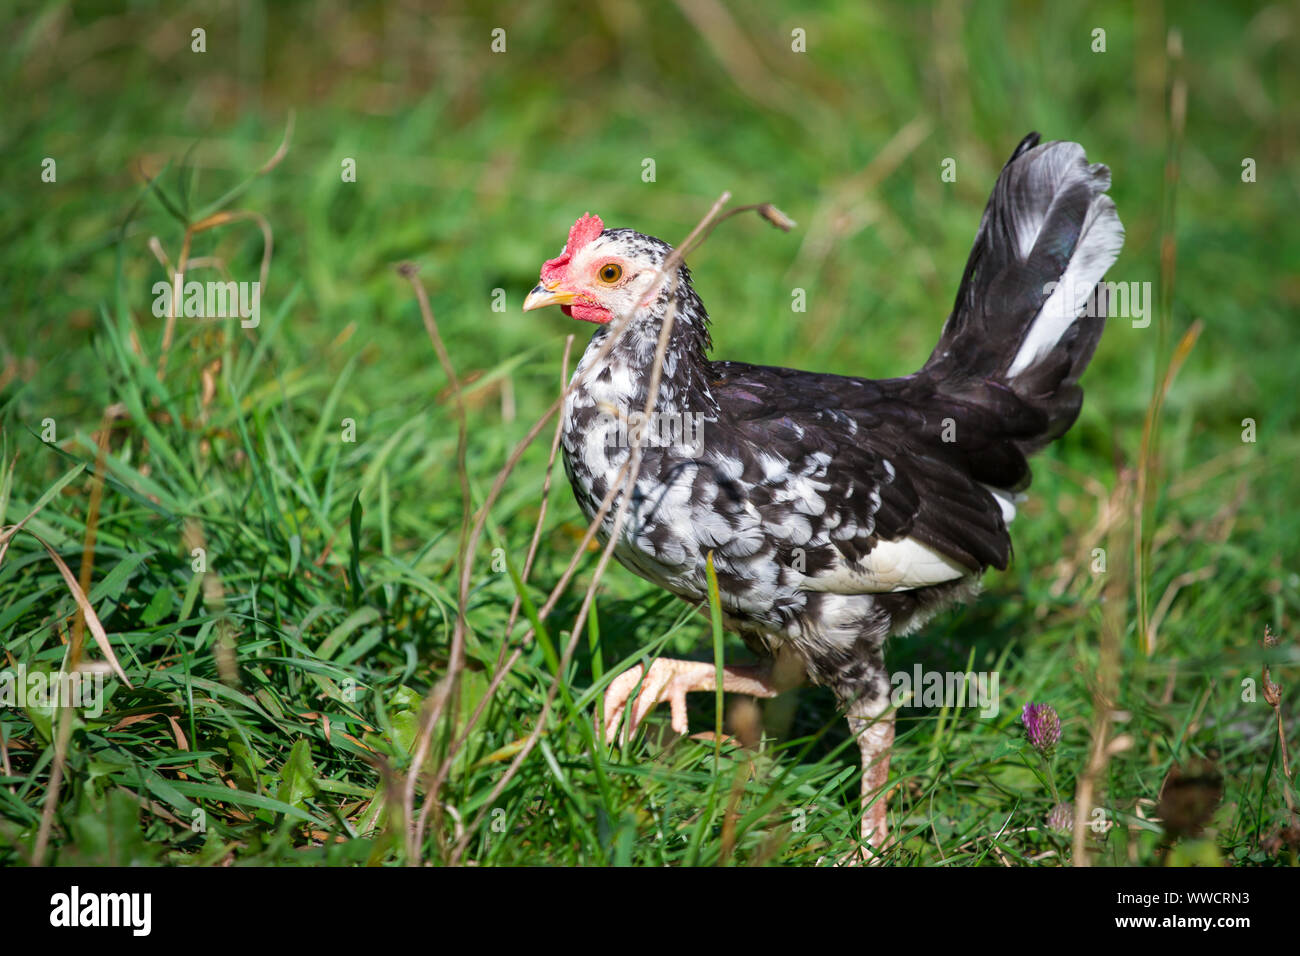 Stoapiperl/ Steinhendl, young rooster - a critically endangered chicken breed from Austria Stock Photo